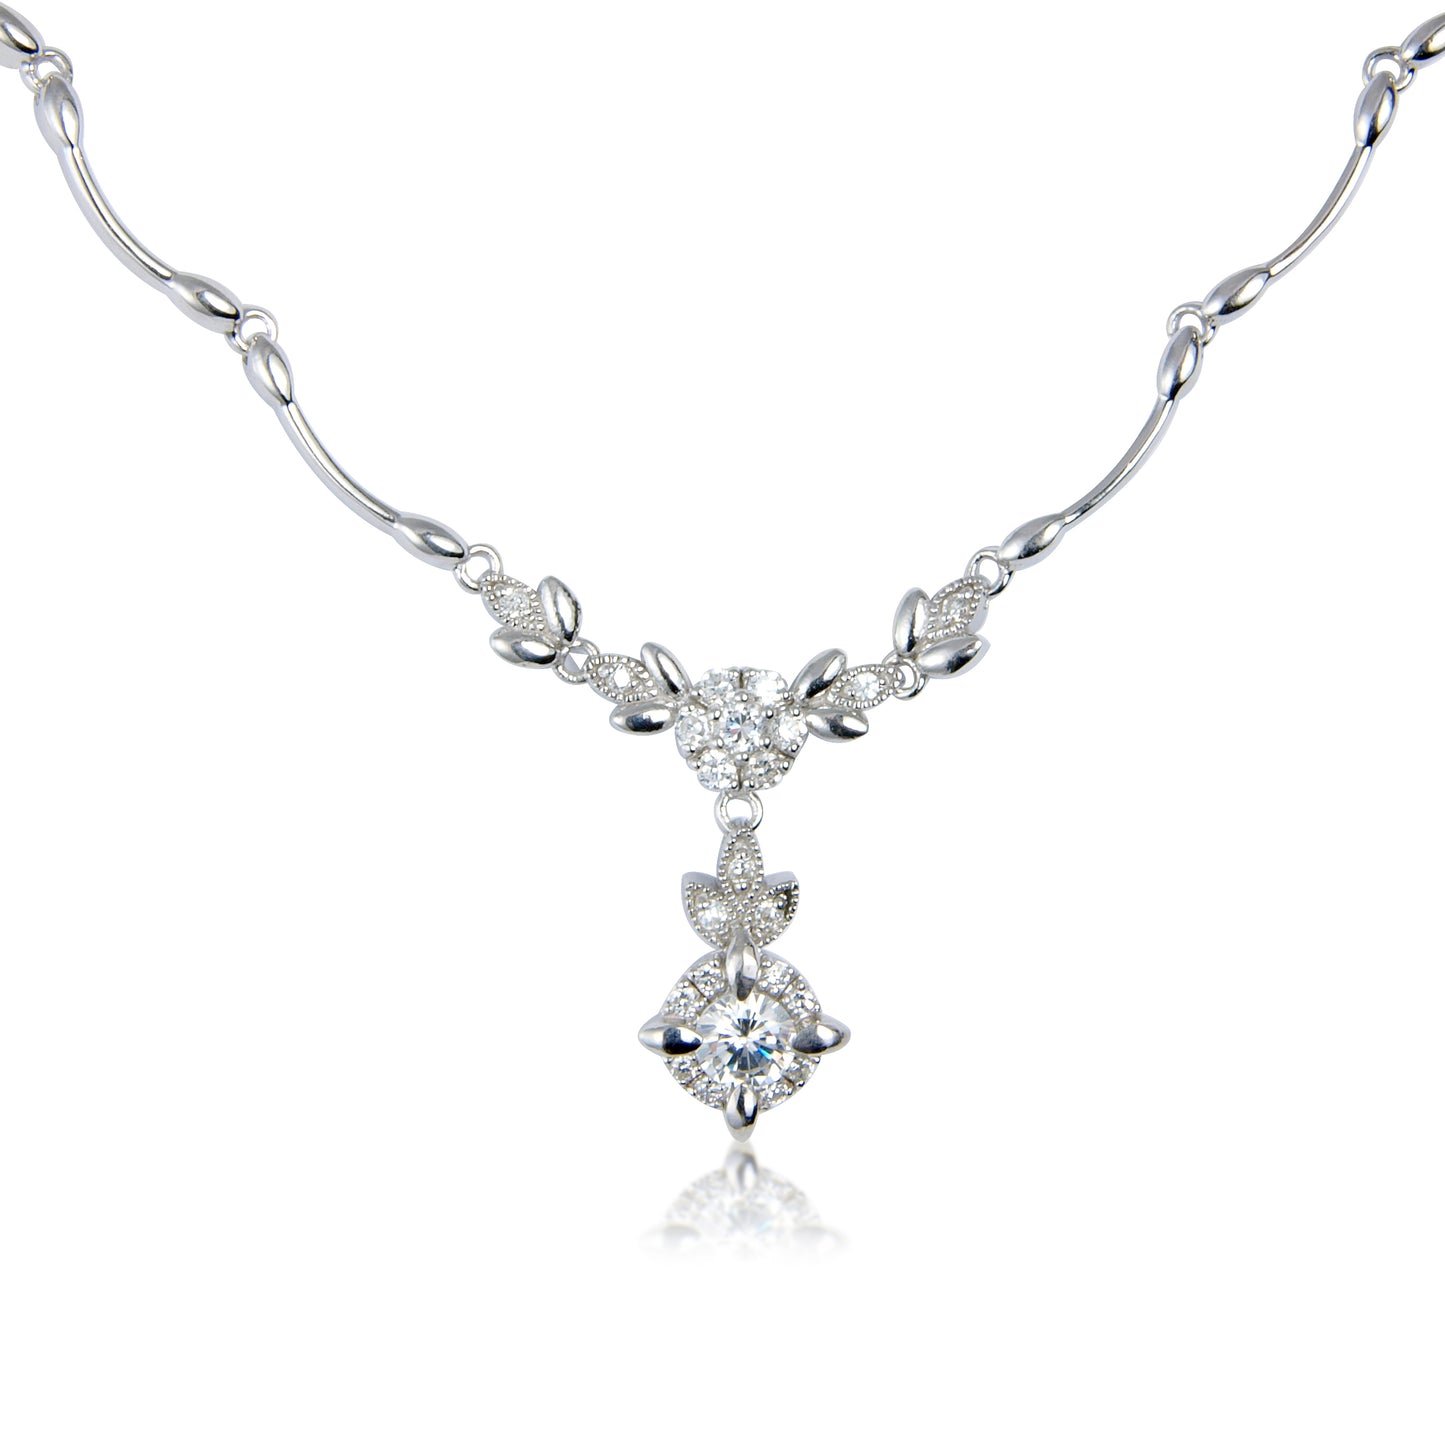 White Cubic Zirconia and Sterling Silver Flower Necklace